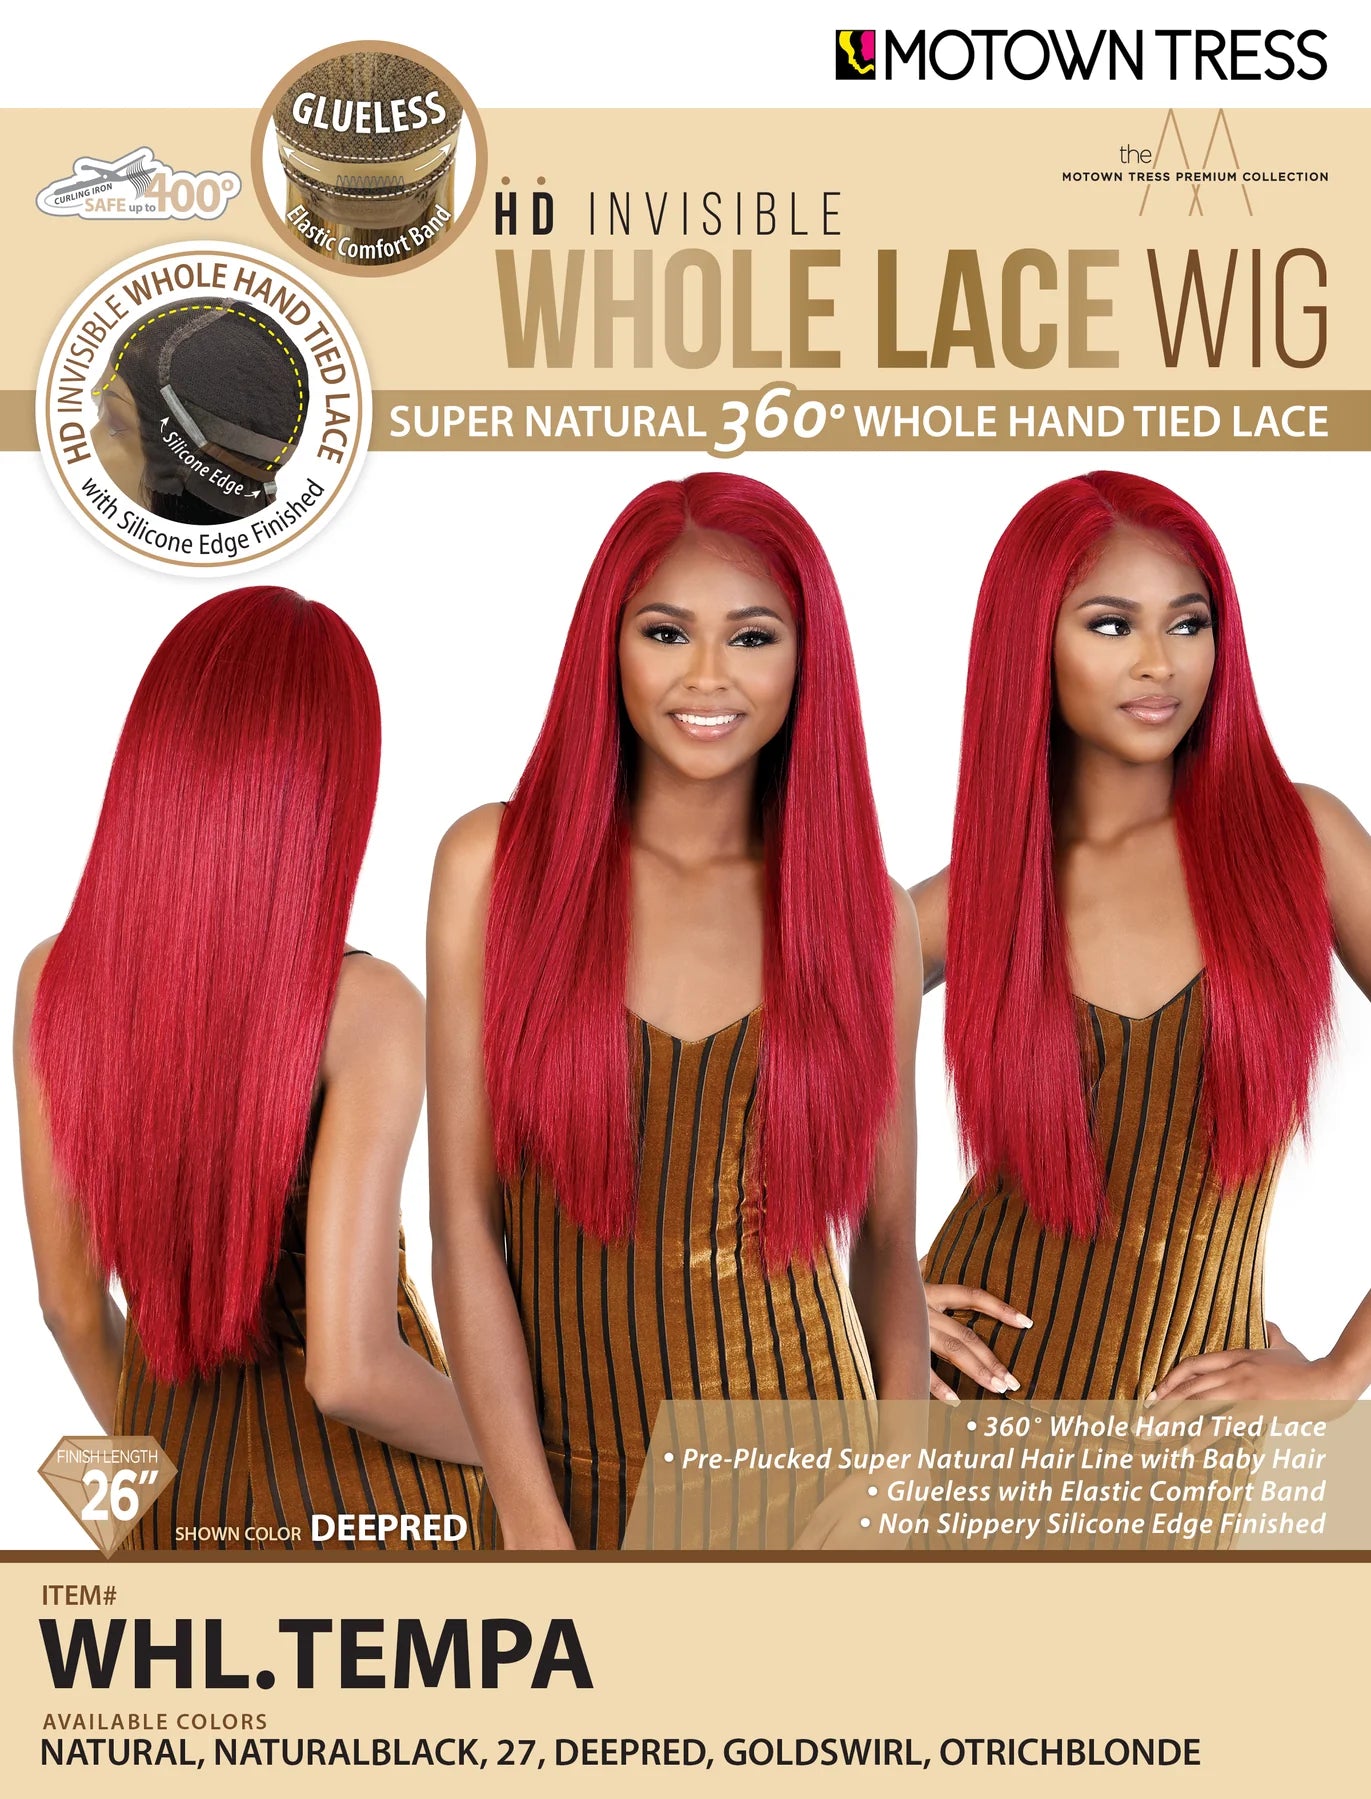 Motown Tress Whole Lace Glueless Synthetic 360 Whole Hand Tied Lace Wig WHL.TEMPA